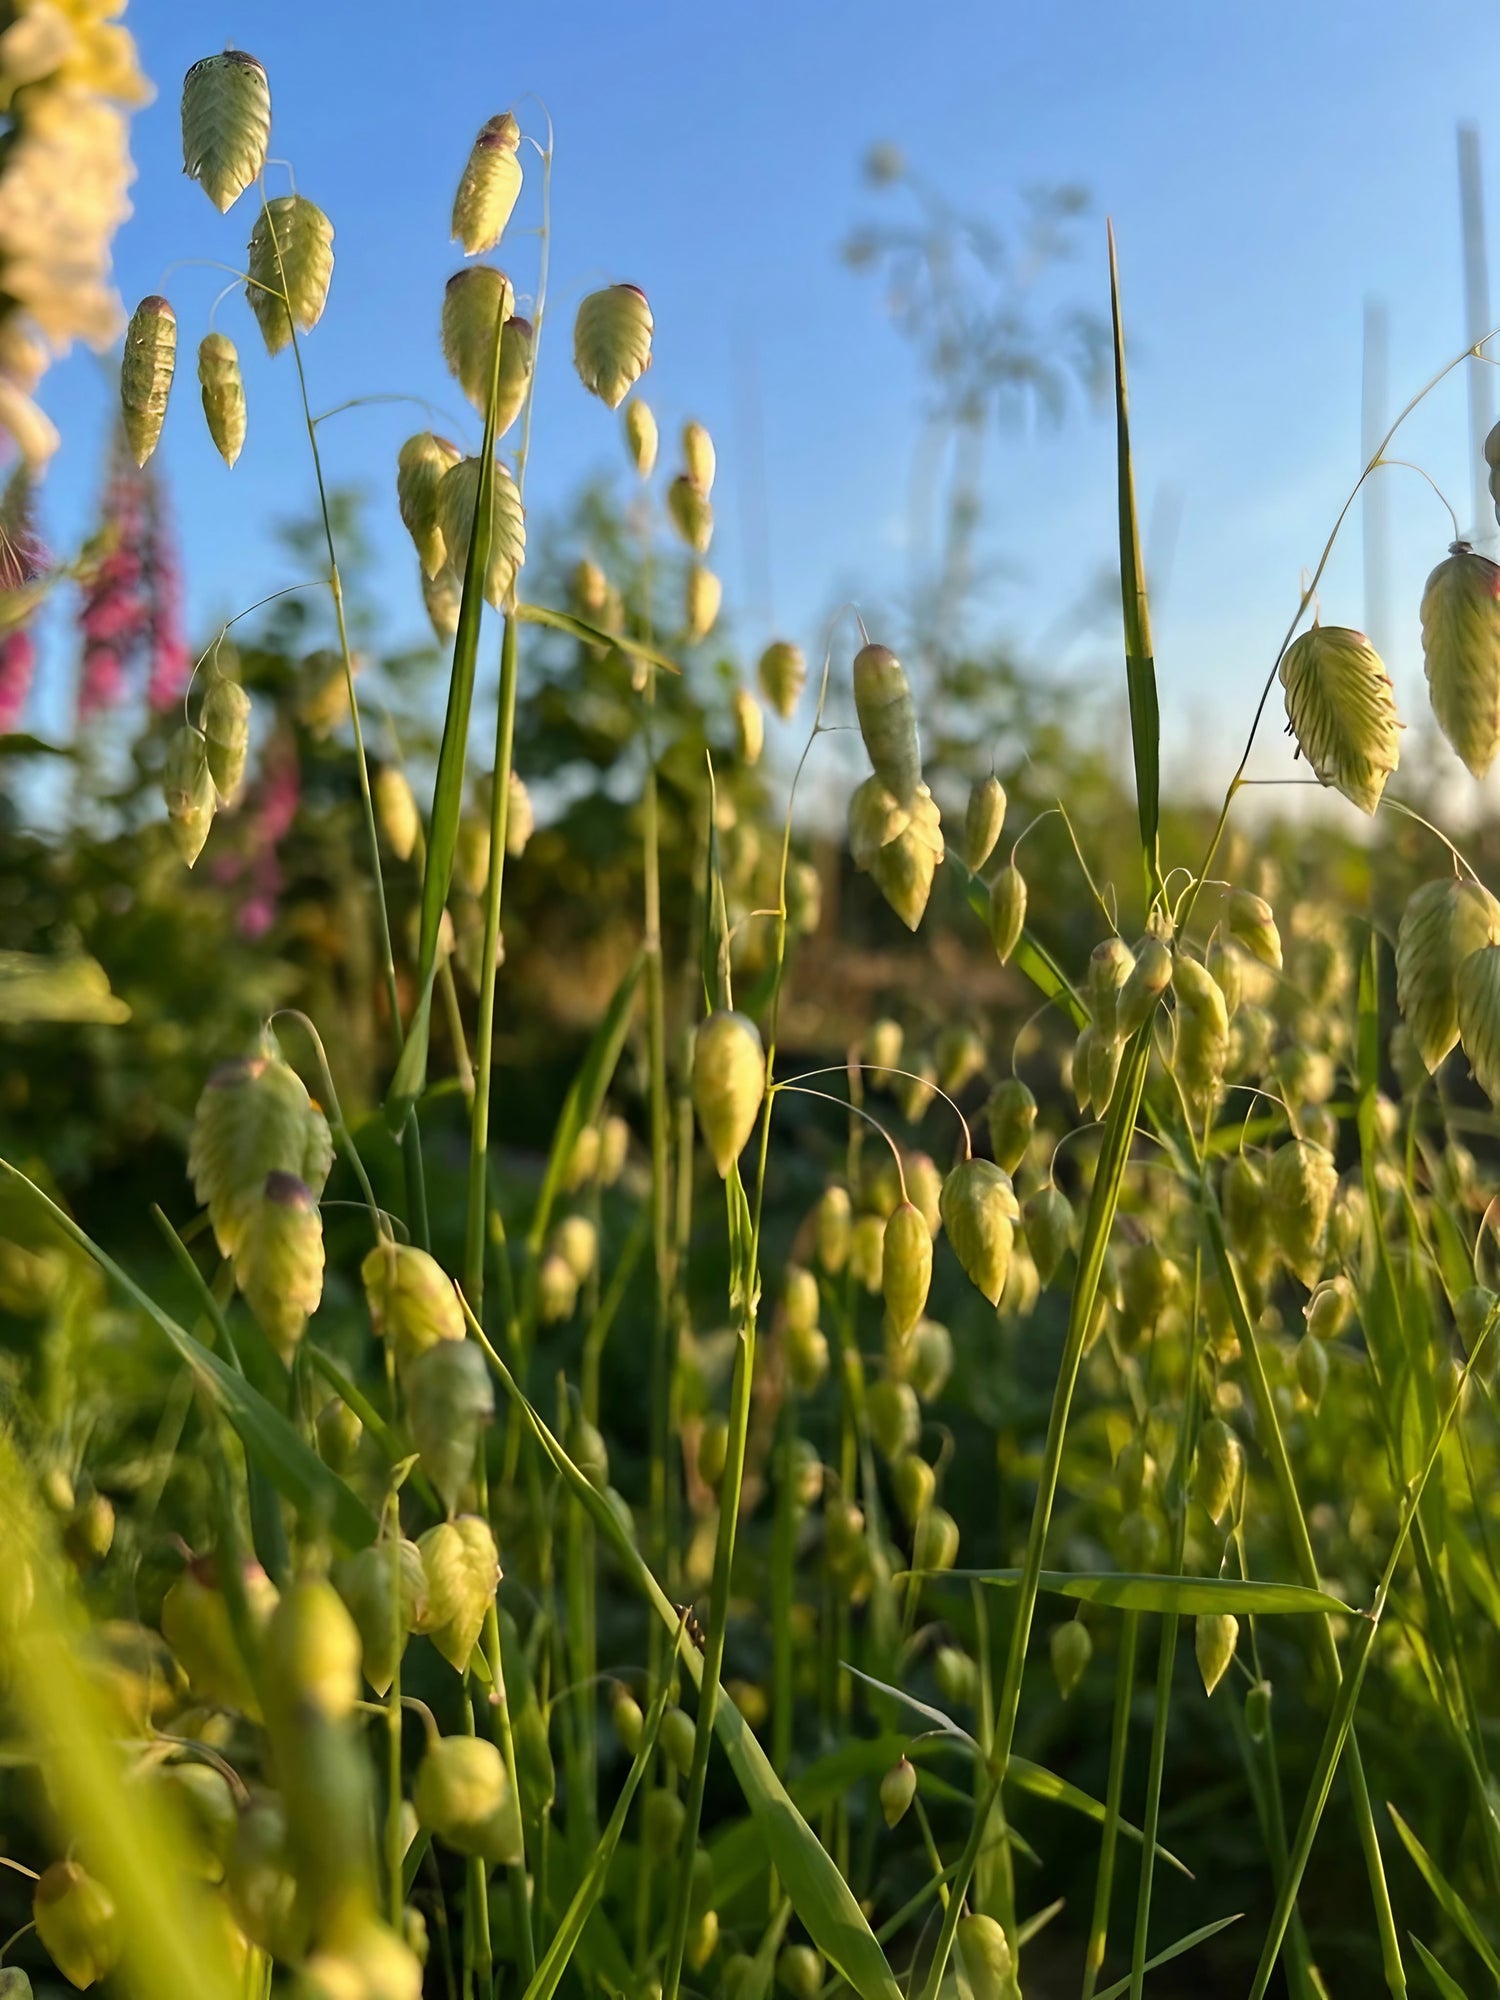 Briza Maxima grass in its natural habitat, showcasing the unique texture of its flowers and stems